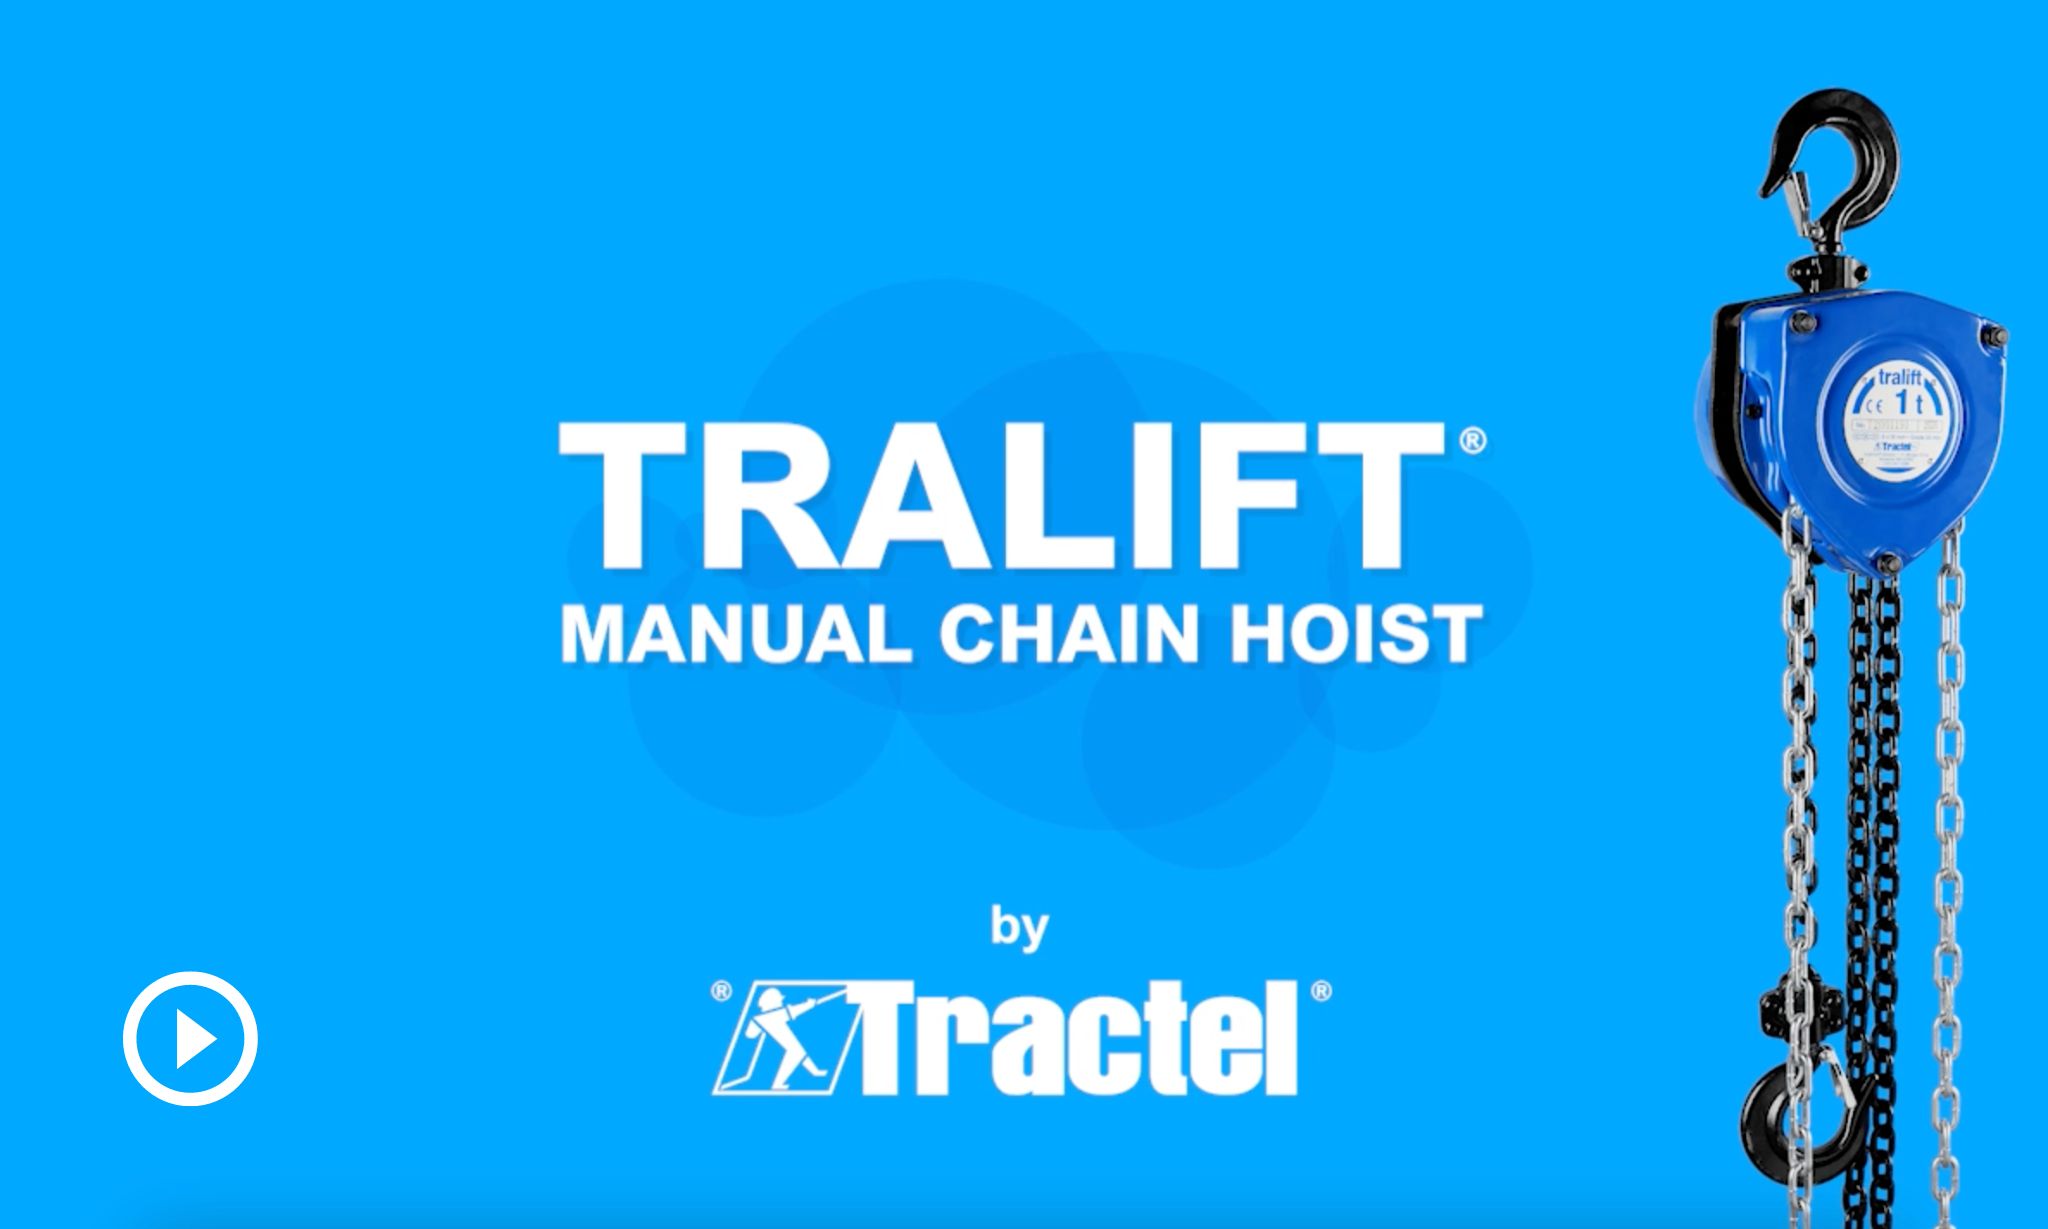 How to use the tralift?